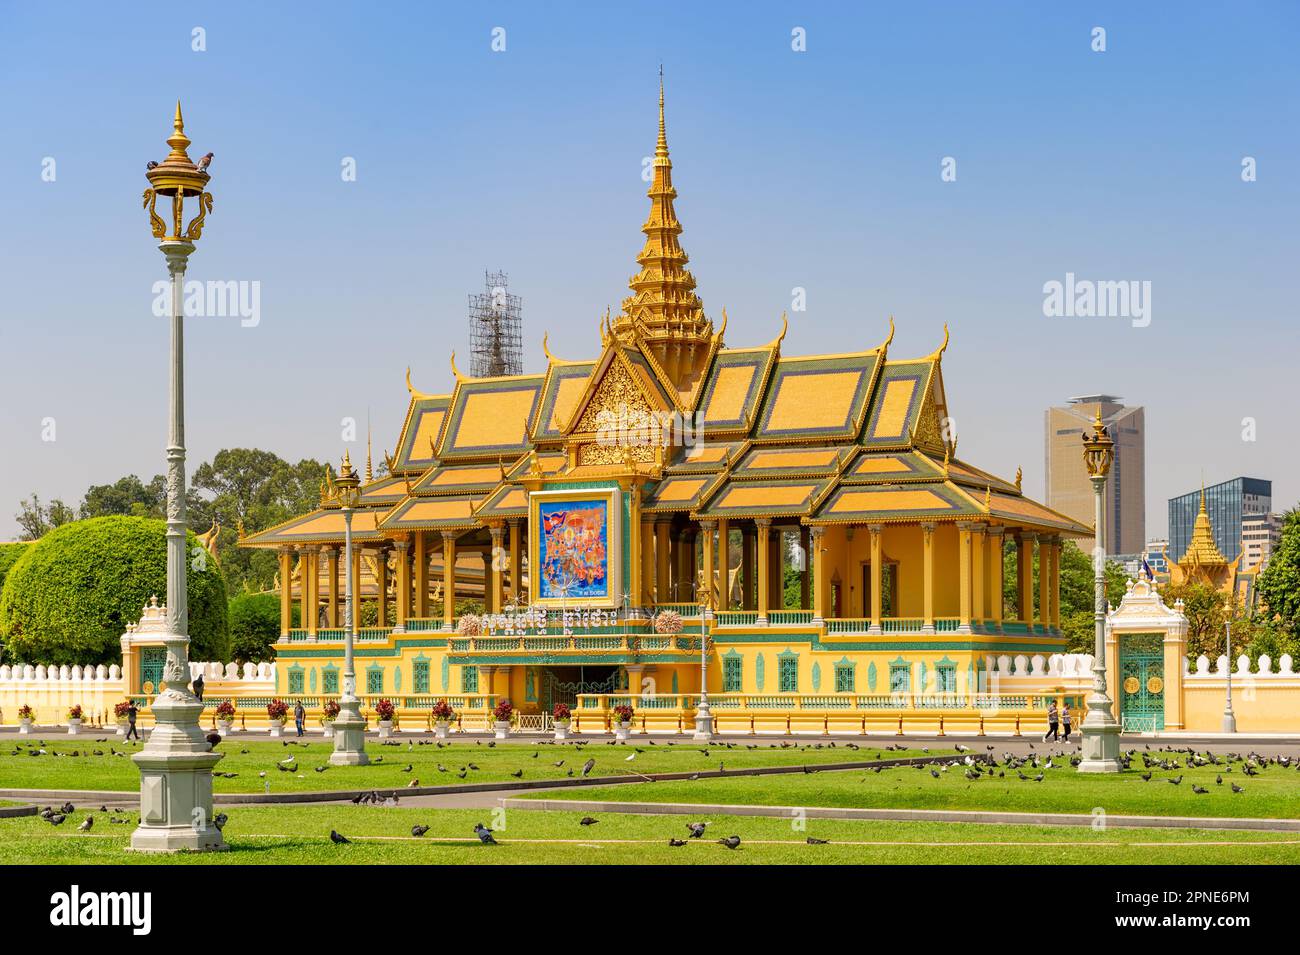 The Royal Palace of Cambodia on a sunny day without people, Phnom Penh, Cambodia Stock Photo